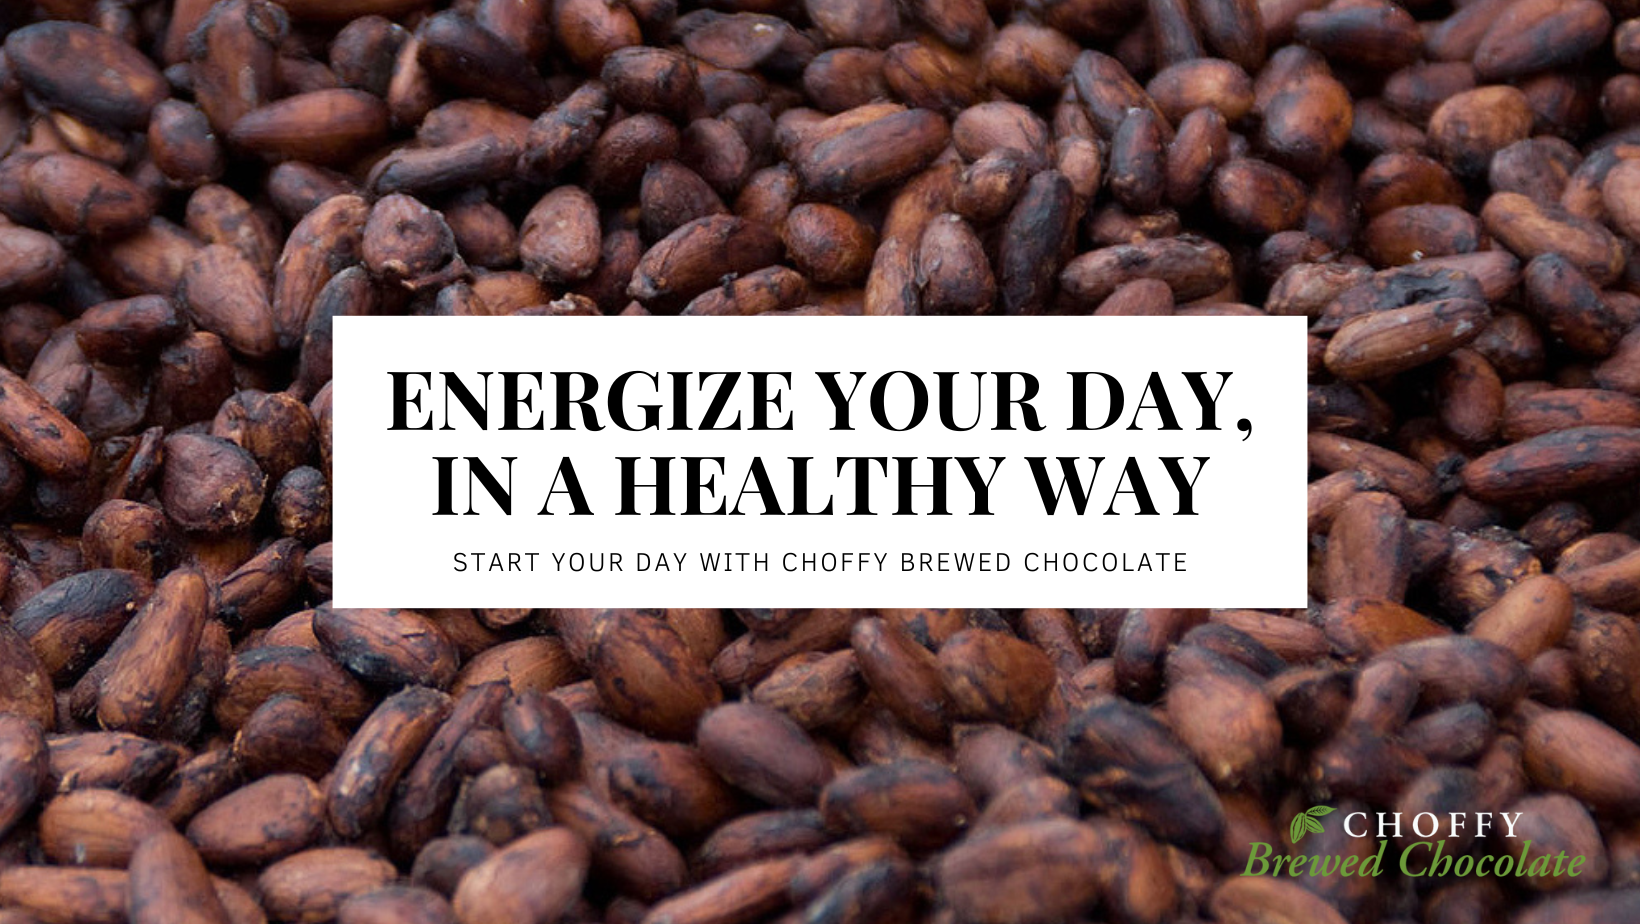 Energize Your Day the Healthy Way with Choffy Brewed Chocolate